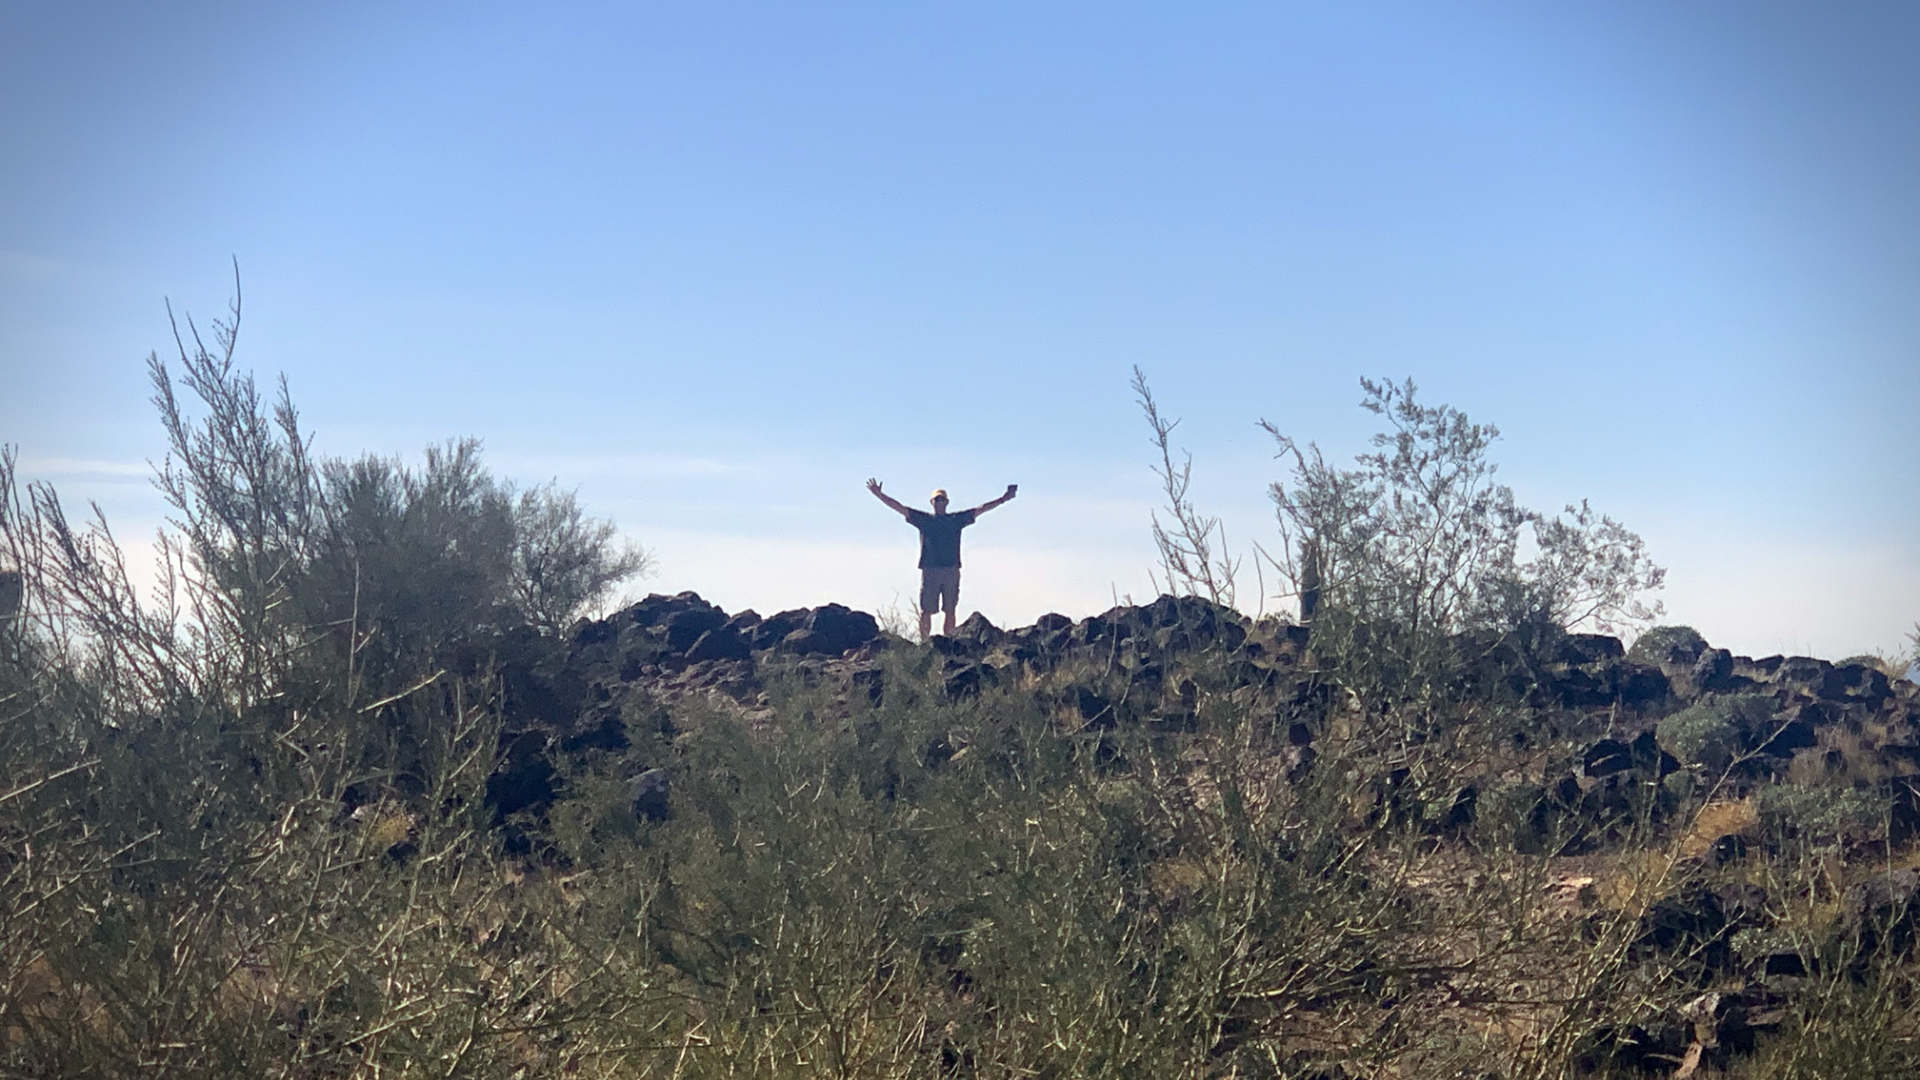 Something Chris managed to squeeze in while in Arizona with his parents: a good hike! Chris's dad was pretty pleased with reaching a summit first!